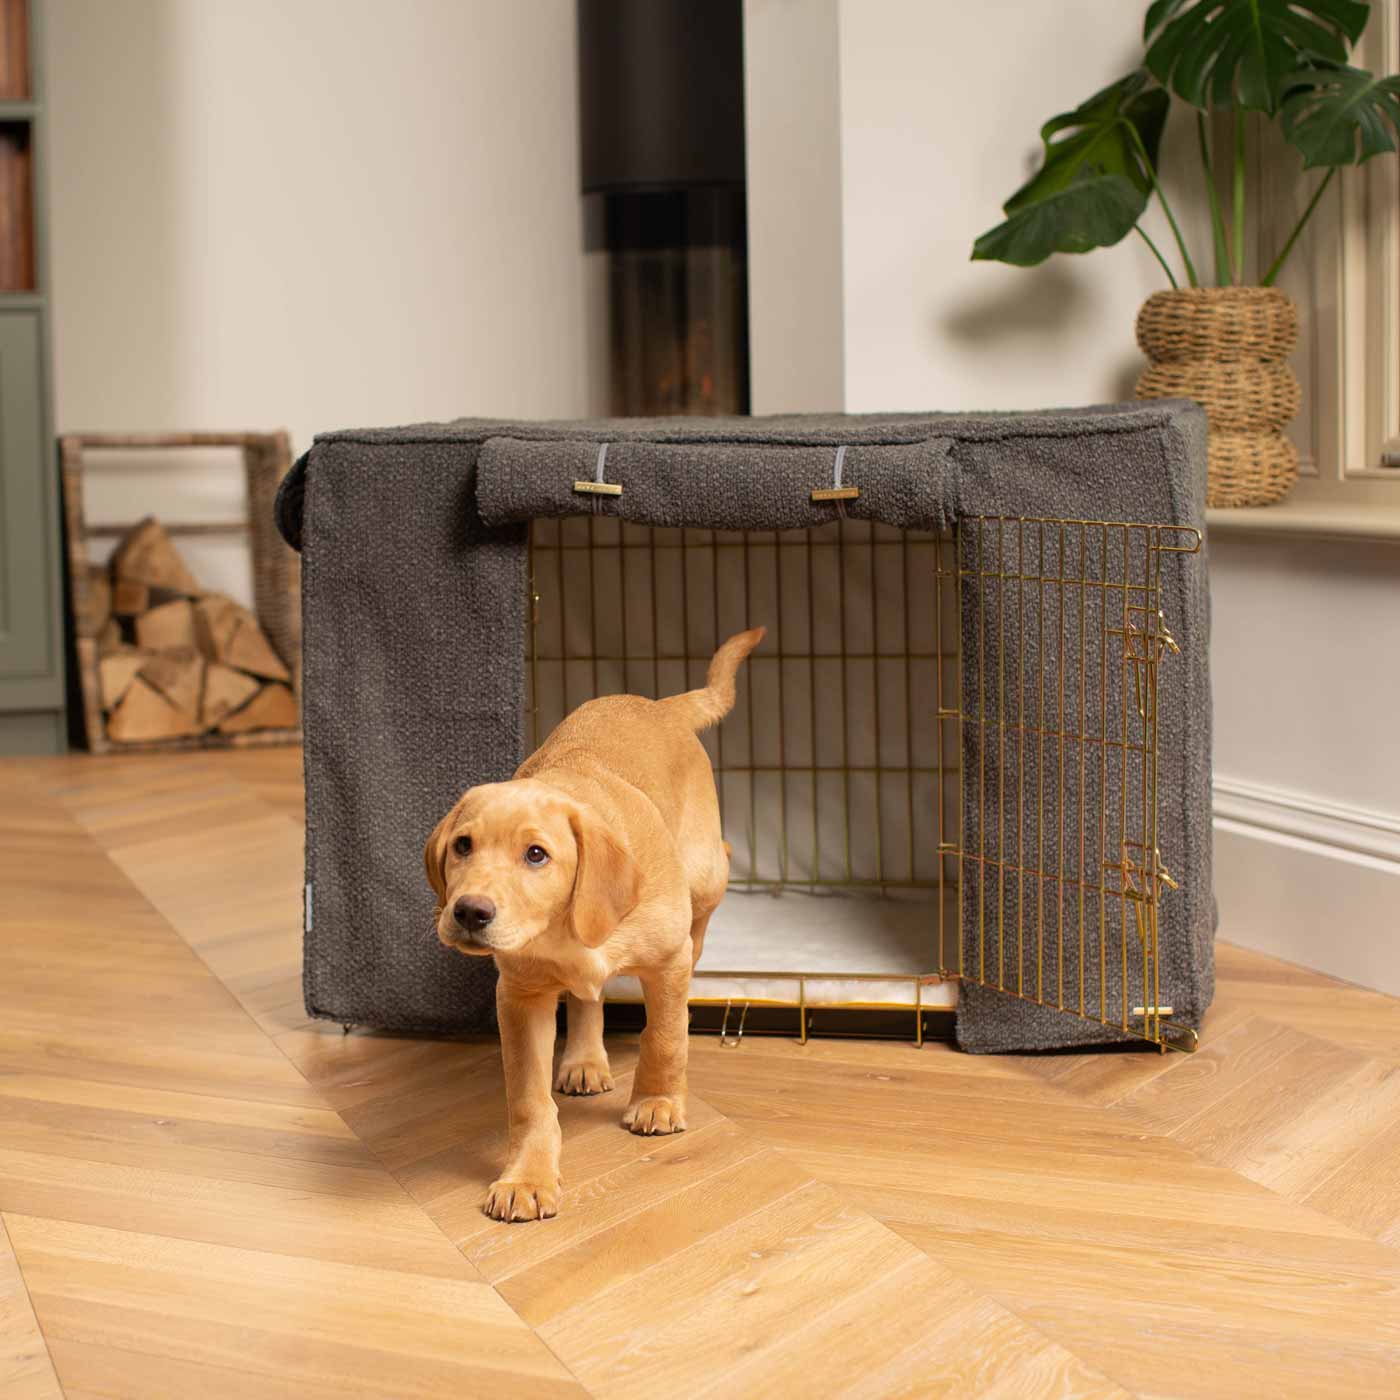 Discover Our Gold Heavy-Duty Dog Cage With Granite Bouclé Cage Cover! The Perfect Cage Accessory For The Ultimate Pet Den. Available To Personalize Here at Lords & Labradors US